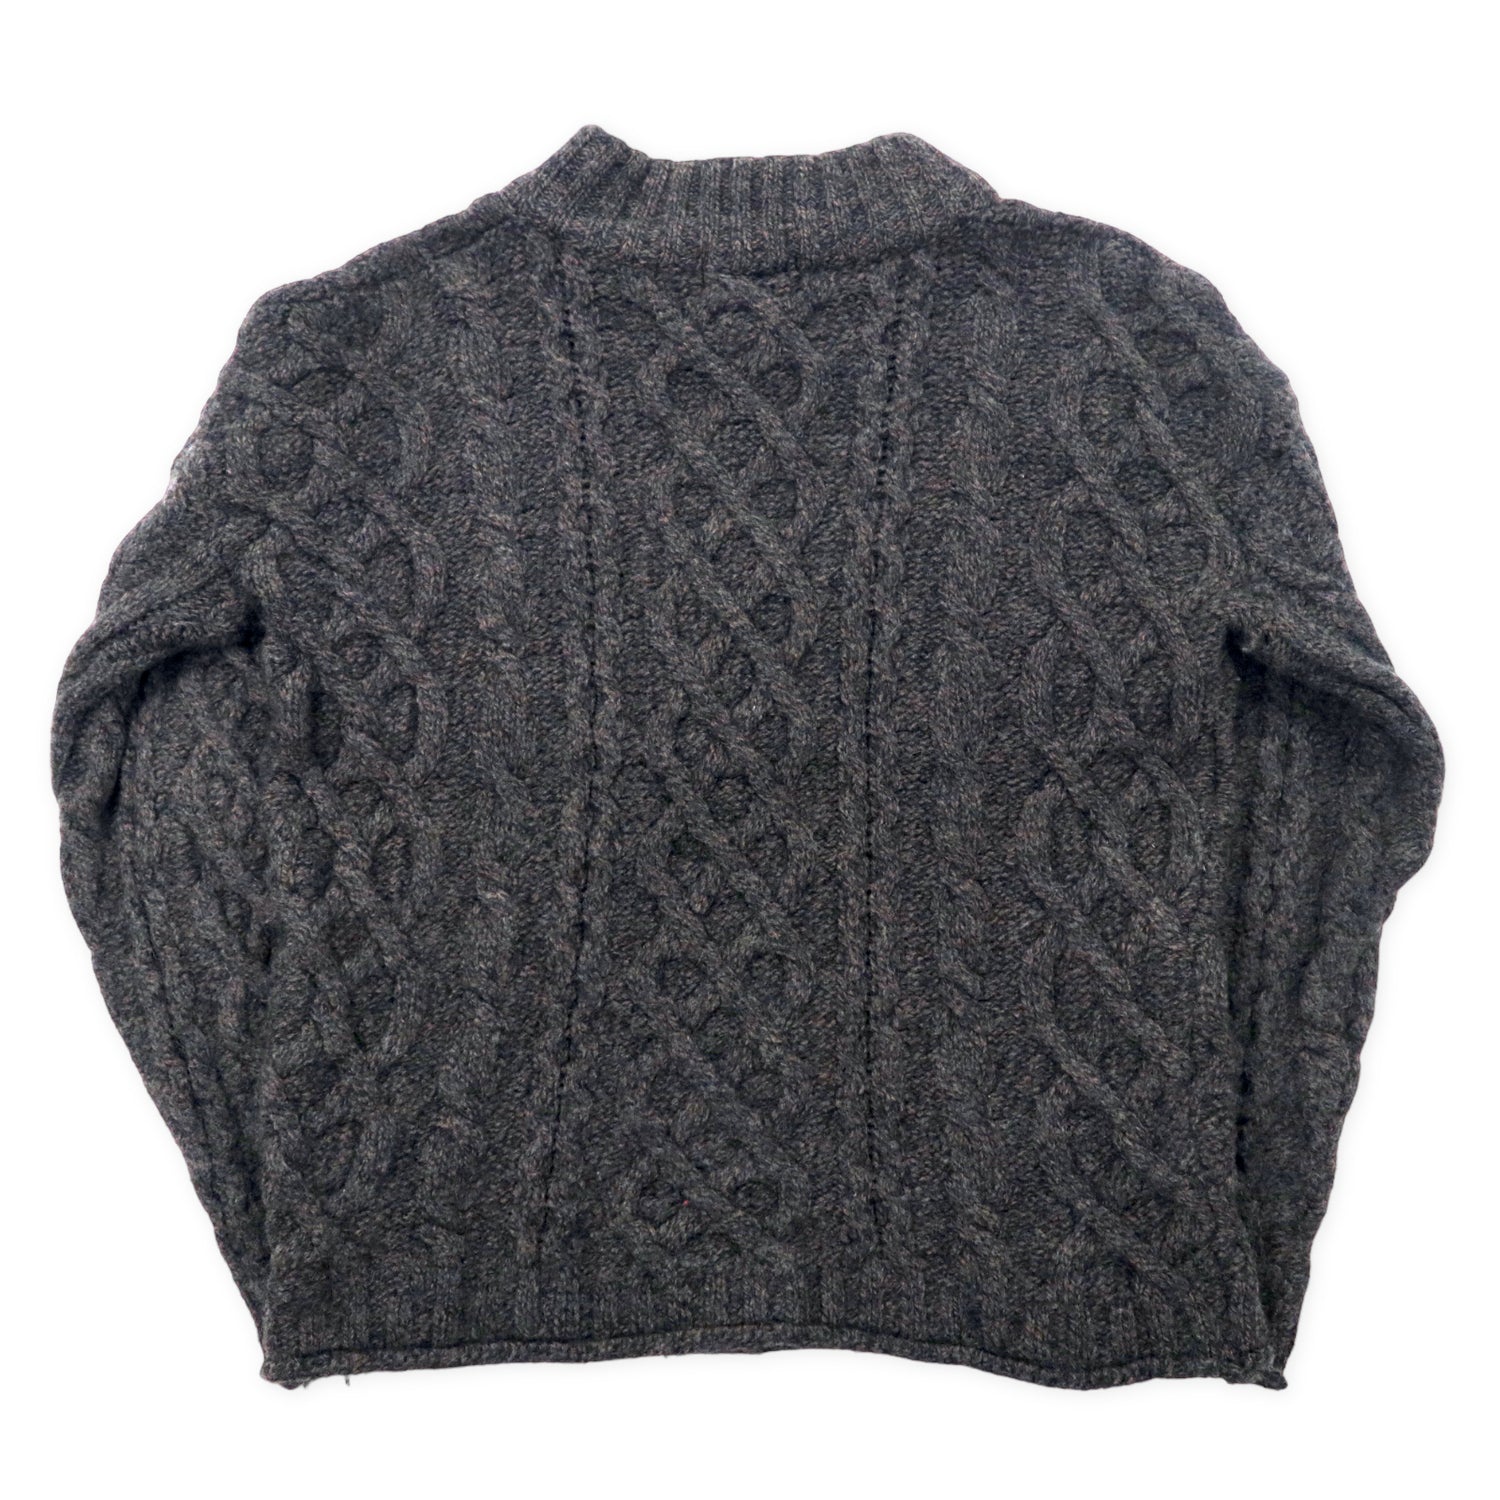 Pergrine MADE Half Zip Fishermannit Alannit Sweater M Gray Wool ...